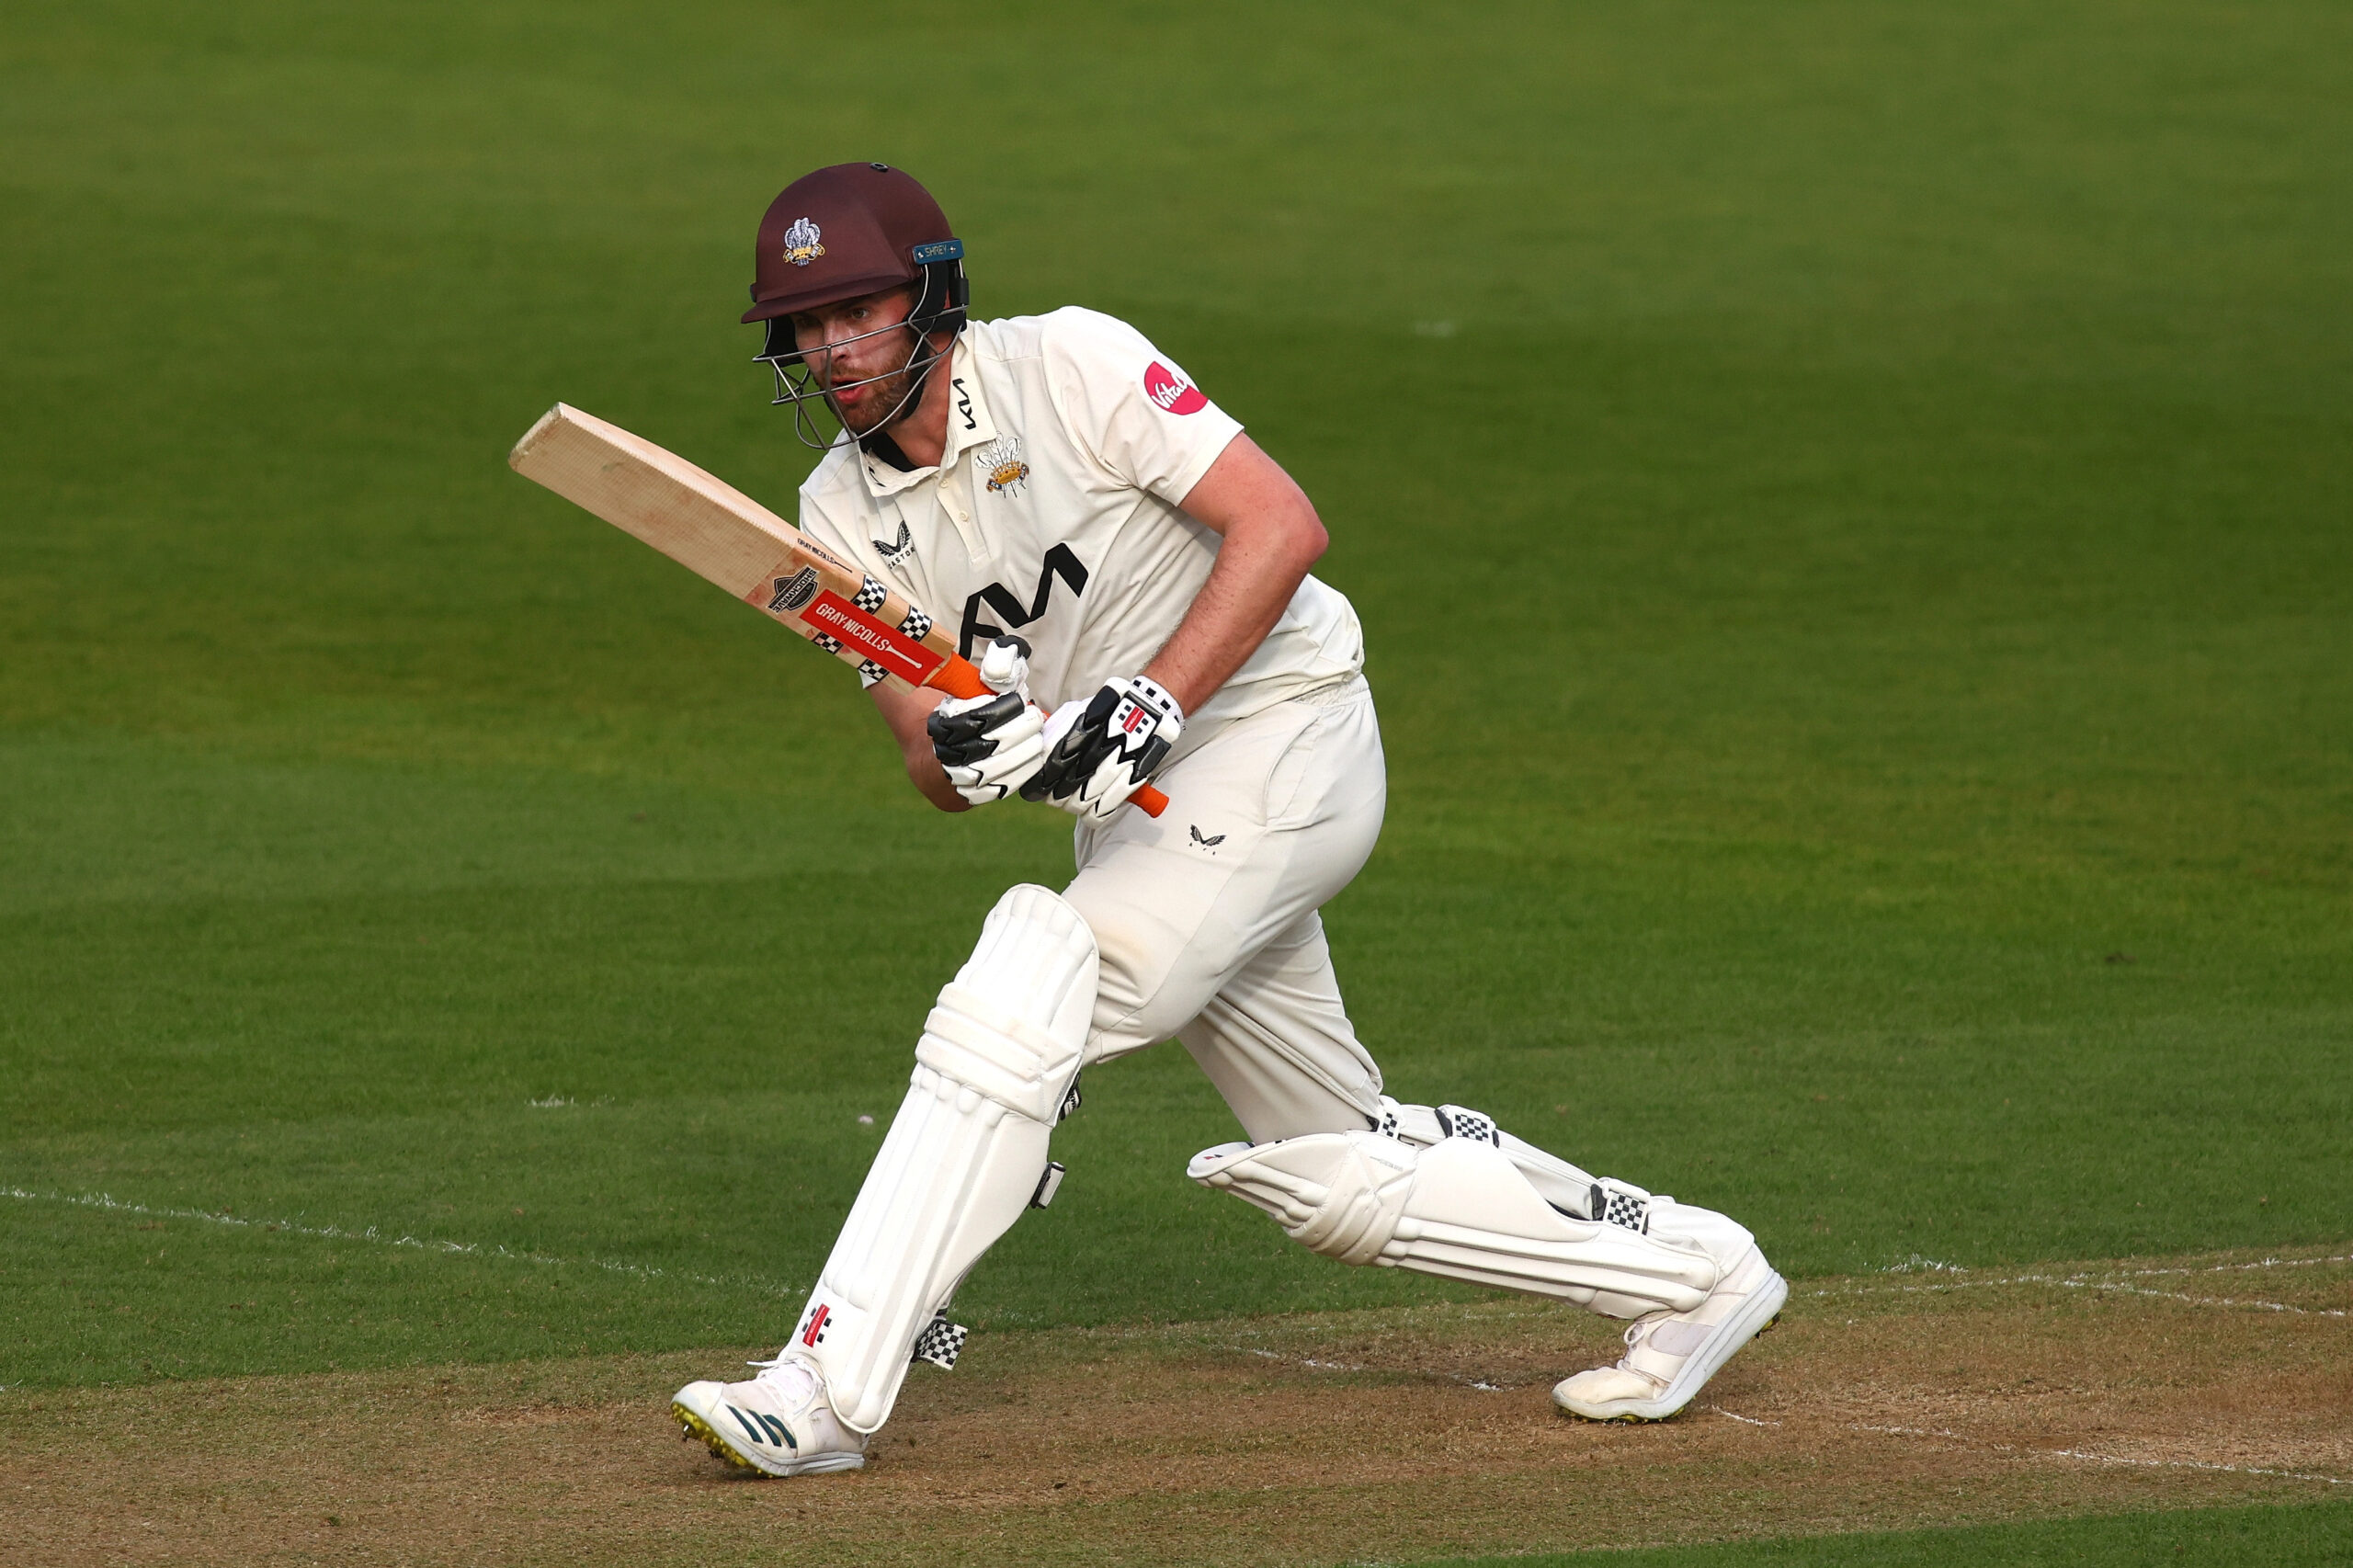 Surrey in strong position heading into final day